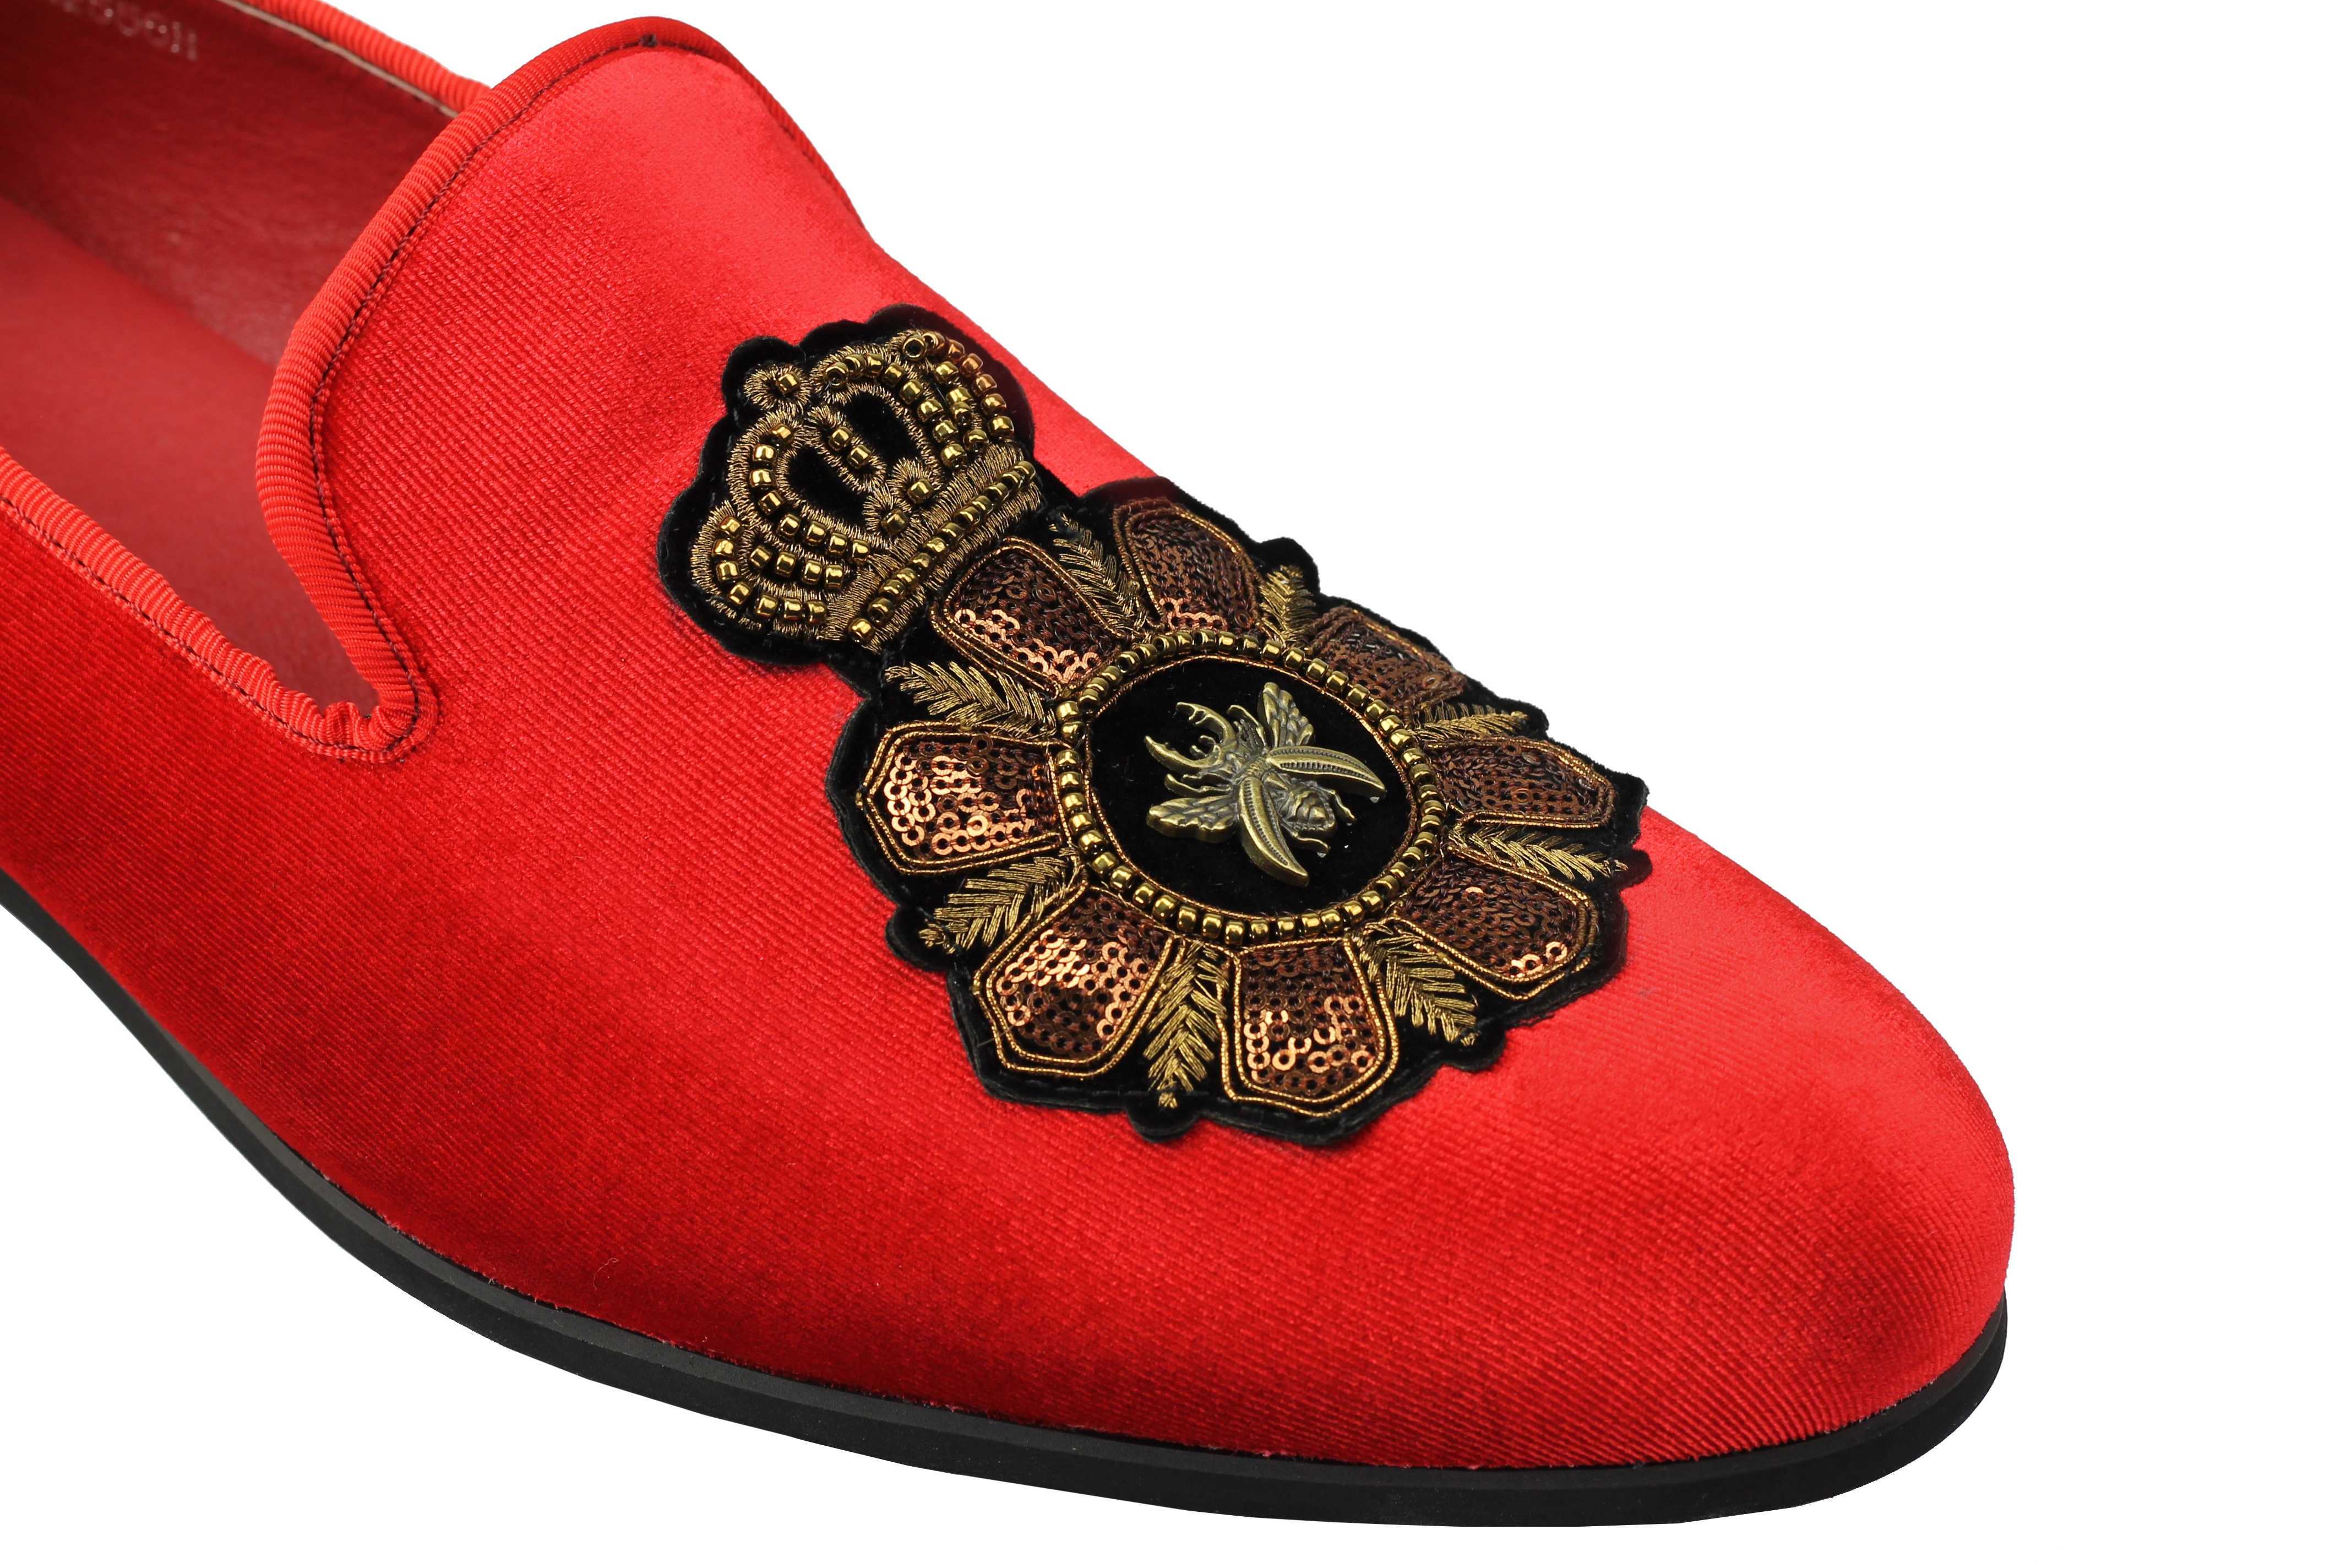 Mens Velvet Loafers Bee Crown Embroidered Vintage Dress Shoes Slip On Slippers Red